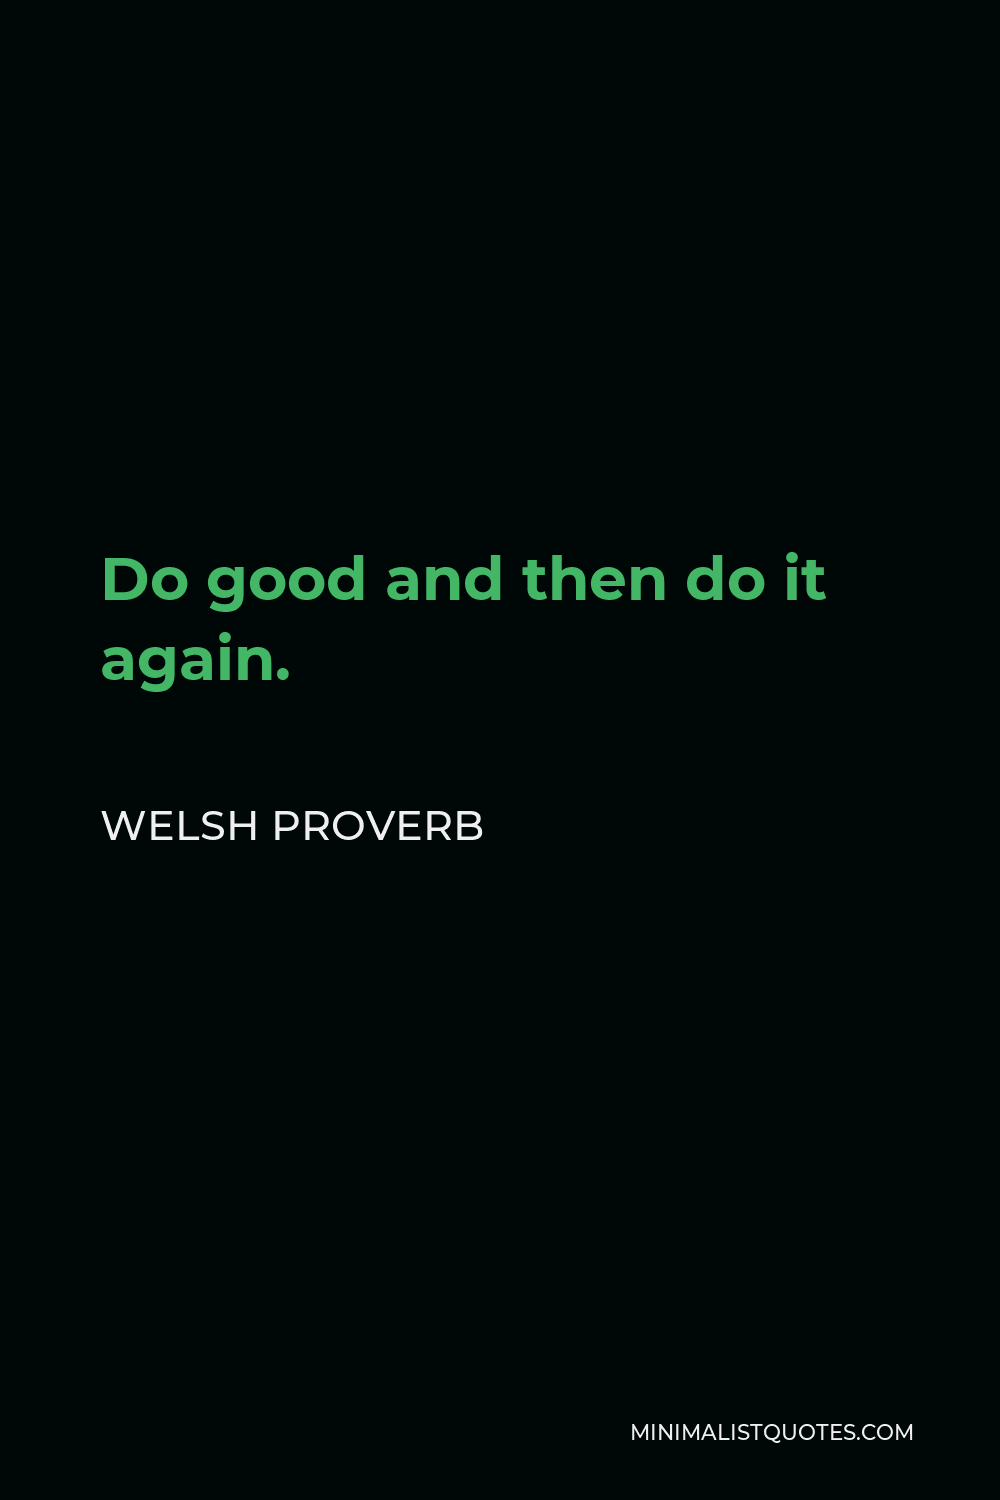 Welsh Proverb Quote - Do good and then do it again.